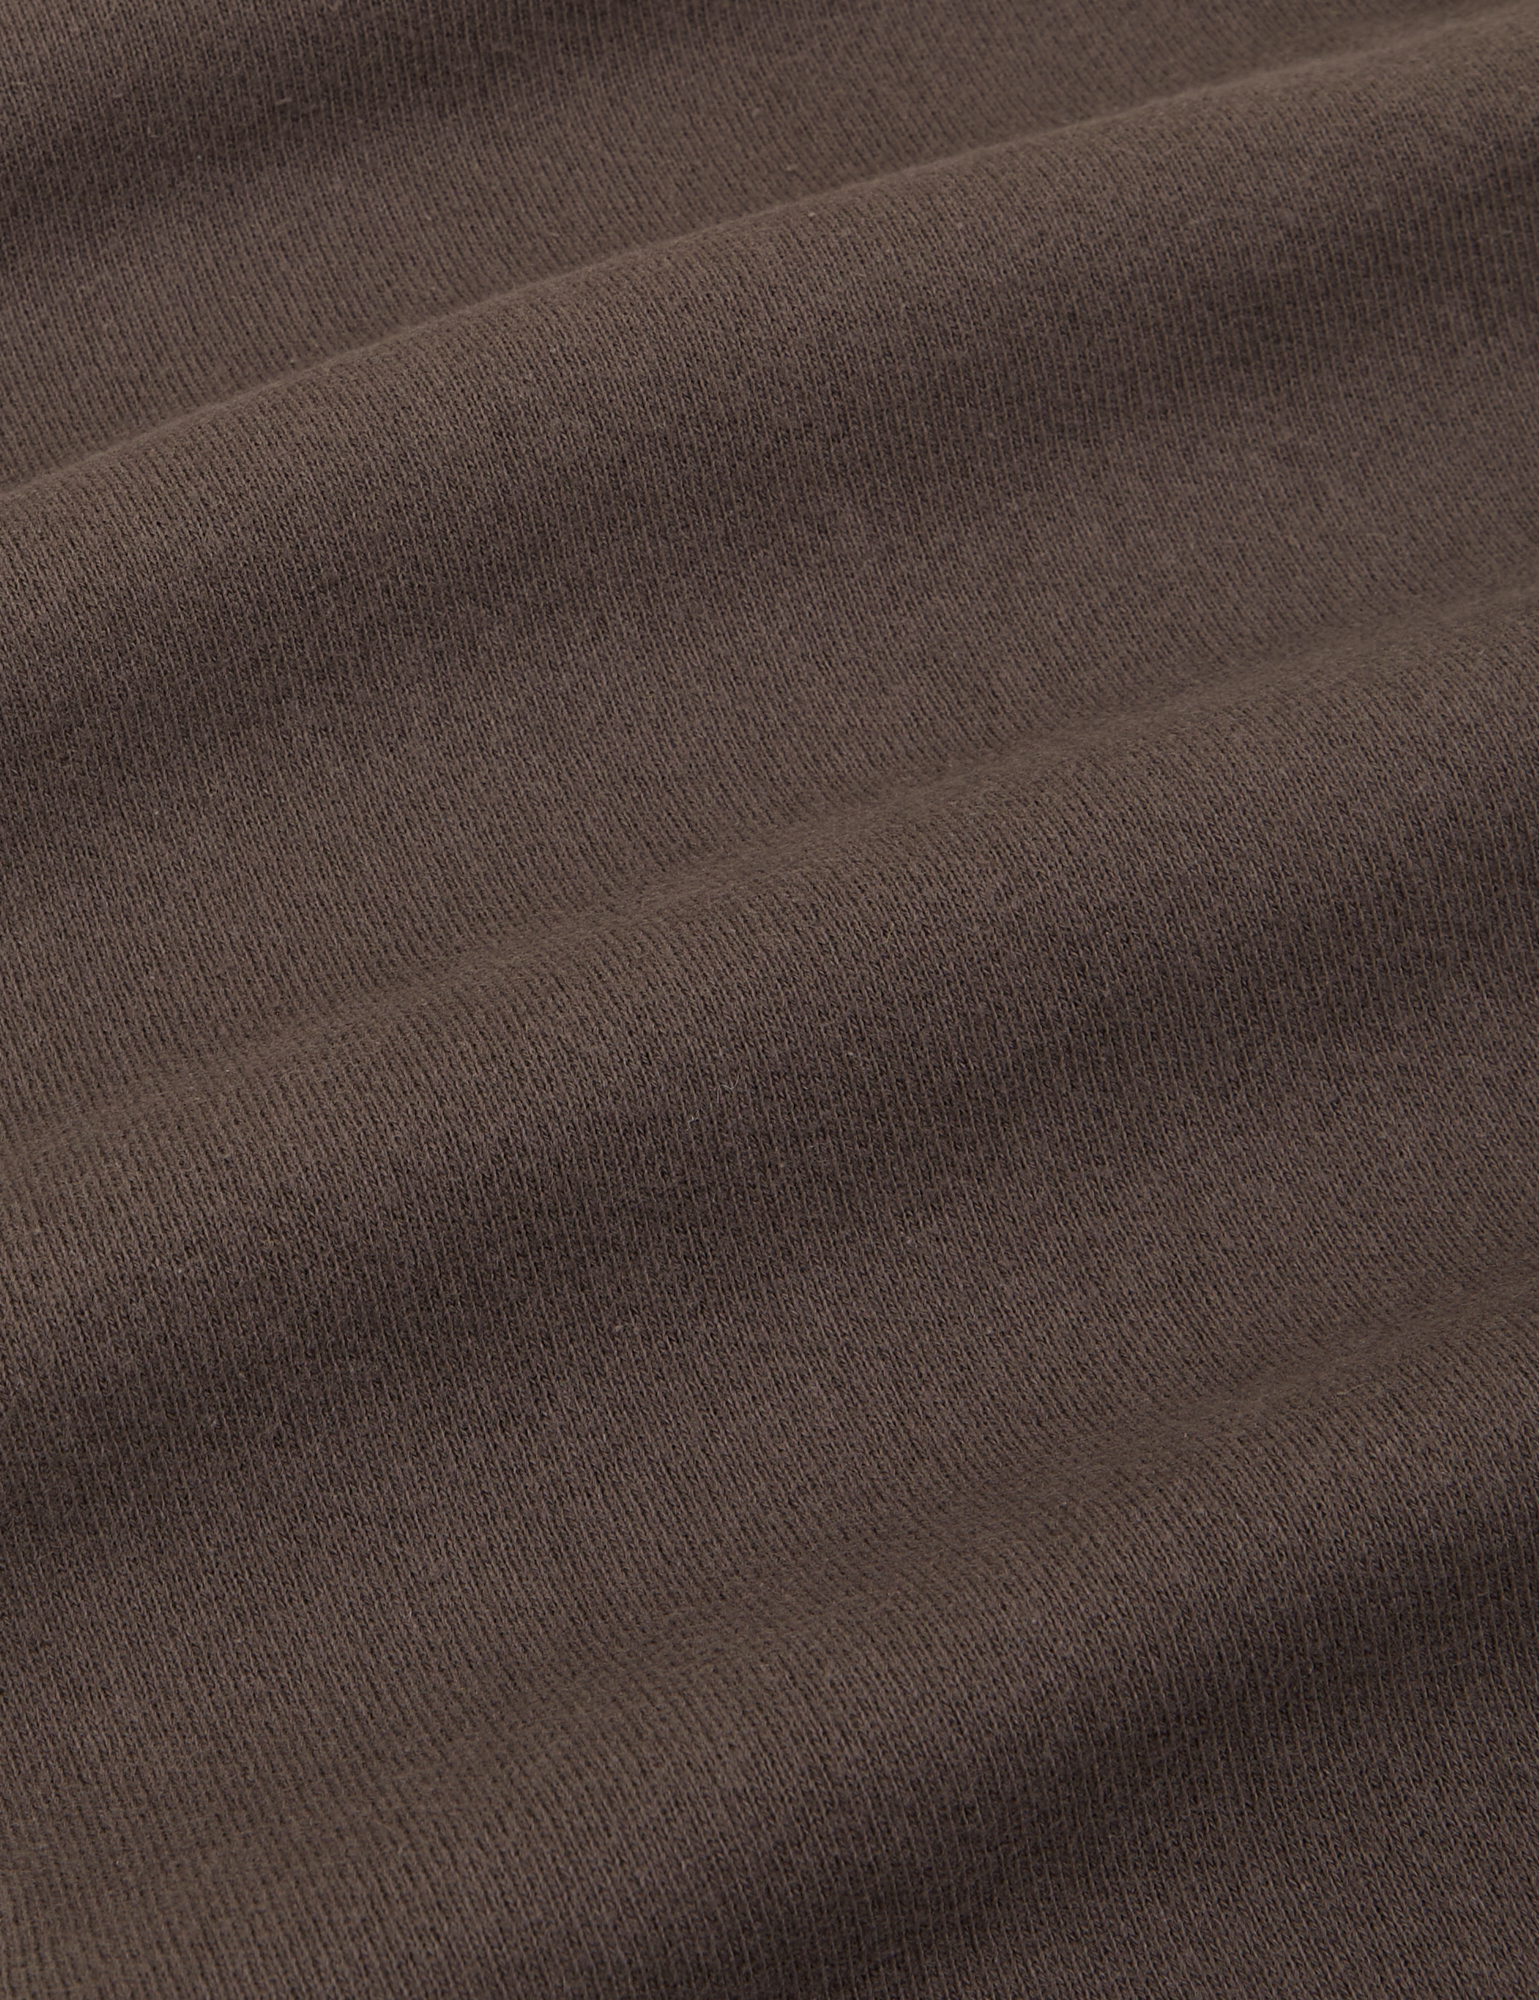 Heavyweight Crew in Espresso Brown fabric detail close up